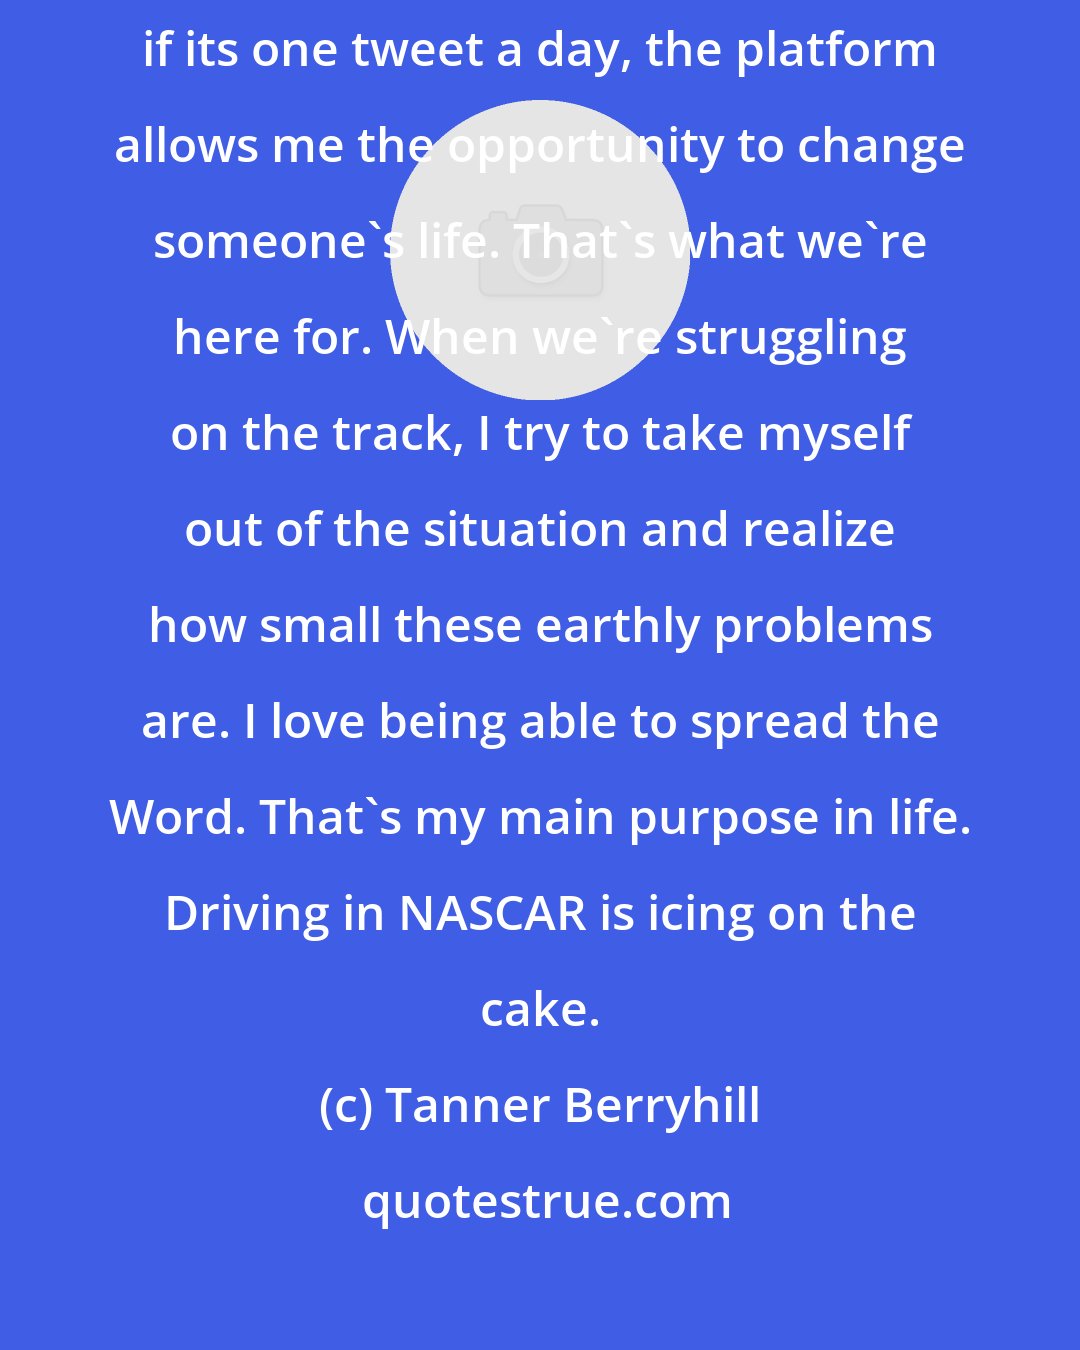 Tanner Berryhill: That's one of the coolest things about being a racecar driver. Even if its one tweet a day, the platform allows me the opportunity to change someone's life. That's what we're here for. When we're struggling on the track, I try to take myself out of the situation and realize how small these earthly problems are. I love being able to spread the Word. That's my main purpose in life. Driving in NASCAR is icing on the cake.